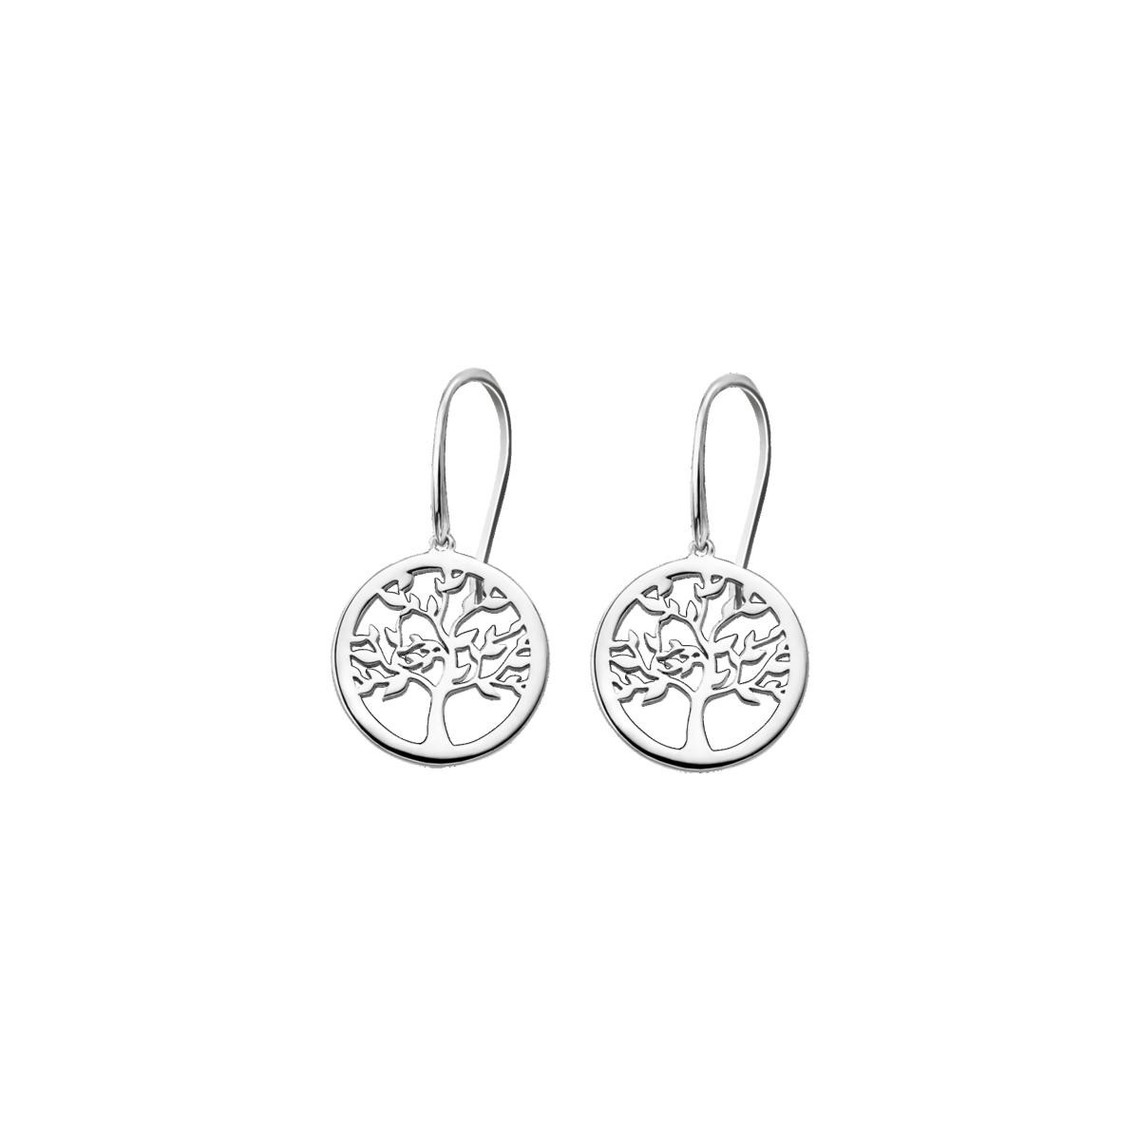 Boucles d'oreilles Lotus Silver TREE OF LIFE LP1641-4-1 - Boucles d'oreilles TREE OF LIFE Argent Lot